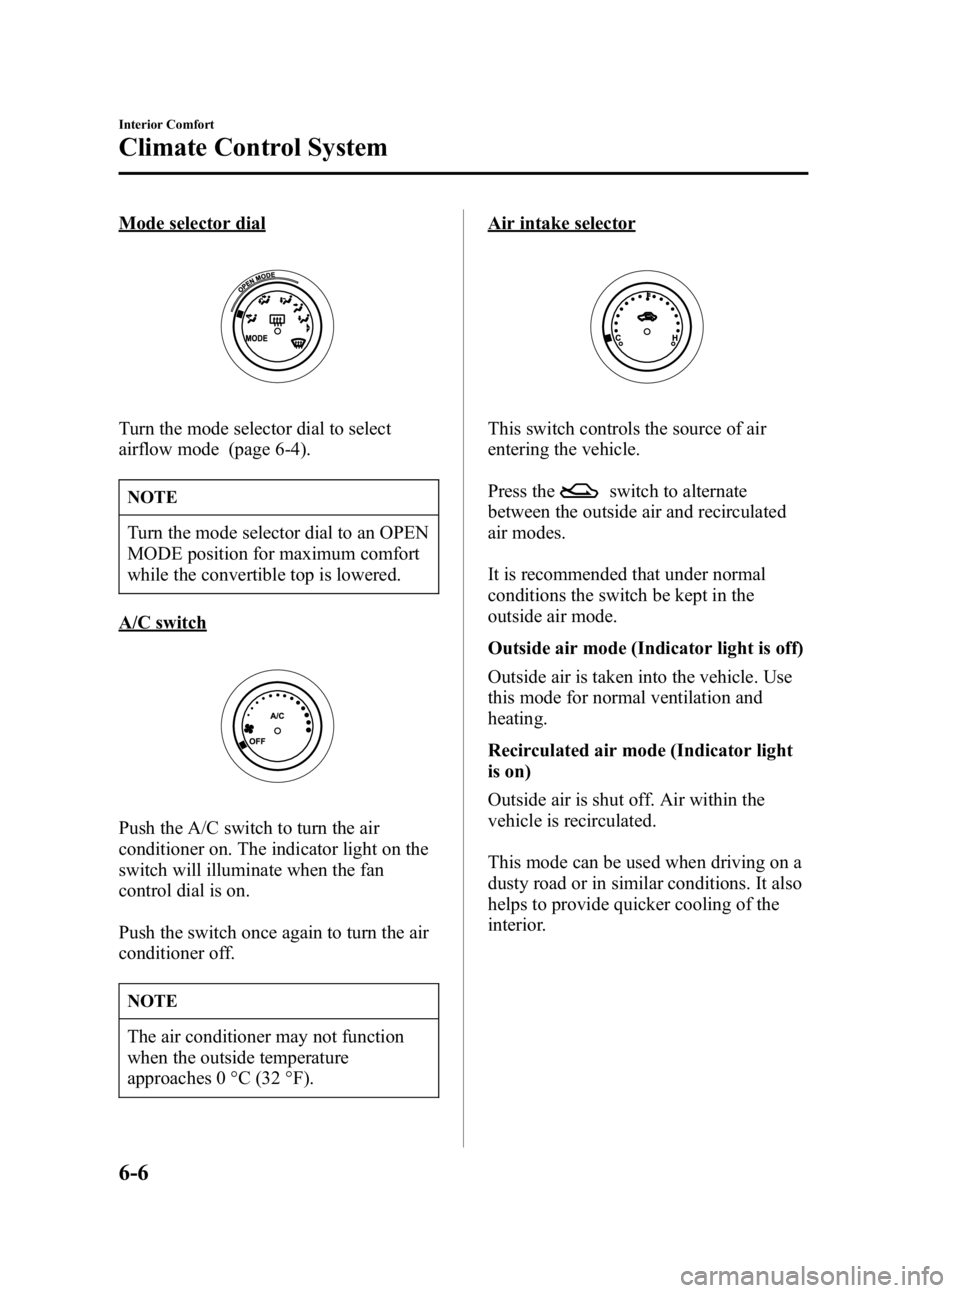 MAZDA MODEL MX-5 MIATA 2006  Owners Manual Black plate (200,1)
Mode selector dial
Turn the mode selector dial to select
airflow mode (page 6-4).
NOTE
Turn the mode selector dial to an OPEN
MODE position for maximum comfort
while the convertibl